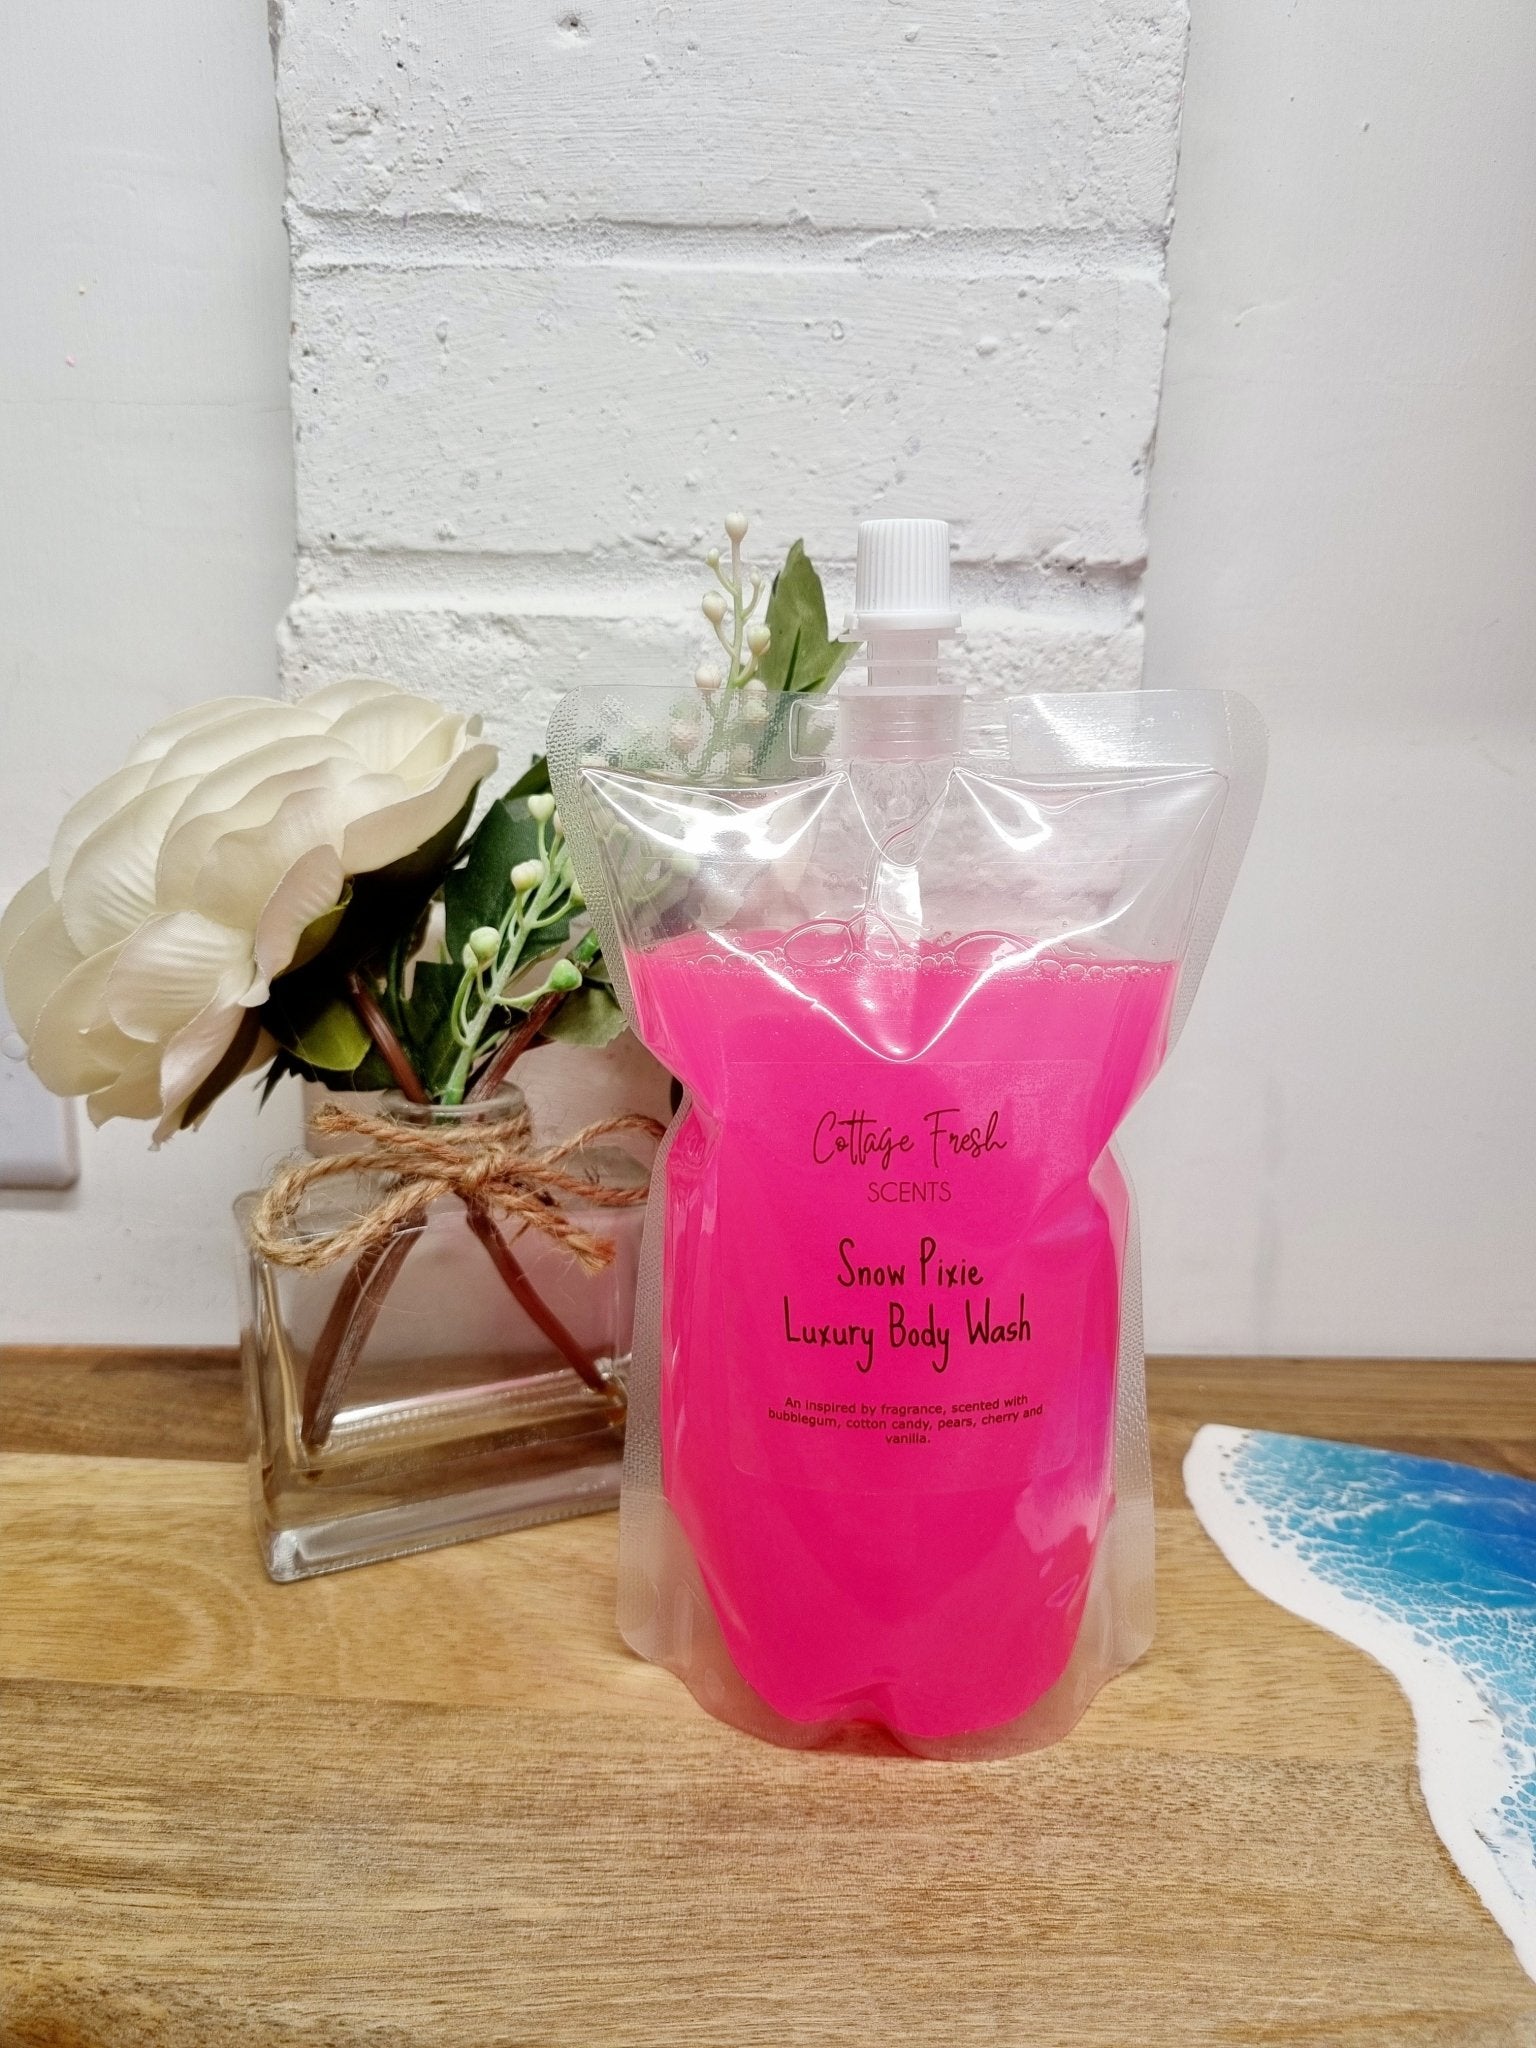 Luxury Body Wash Refill Pouch - Body Wash - Cottage Fresh Scents